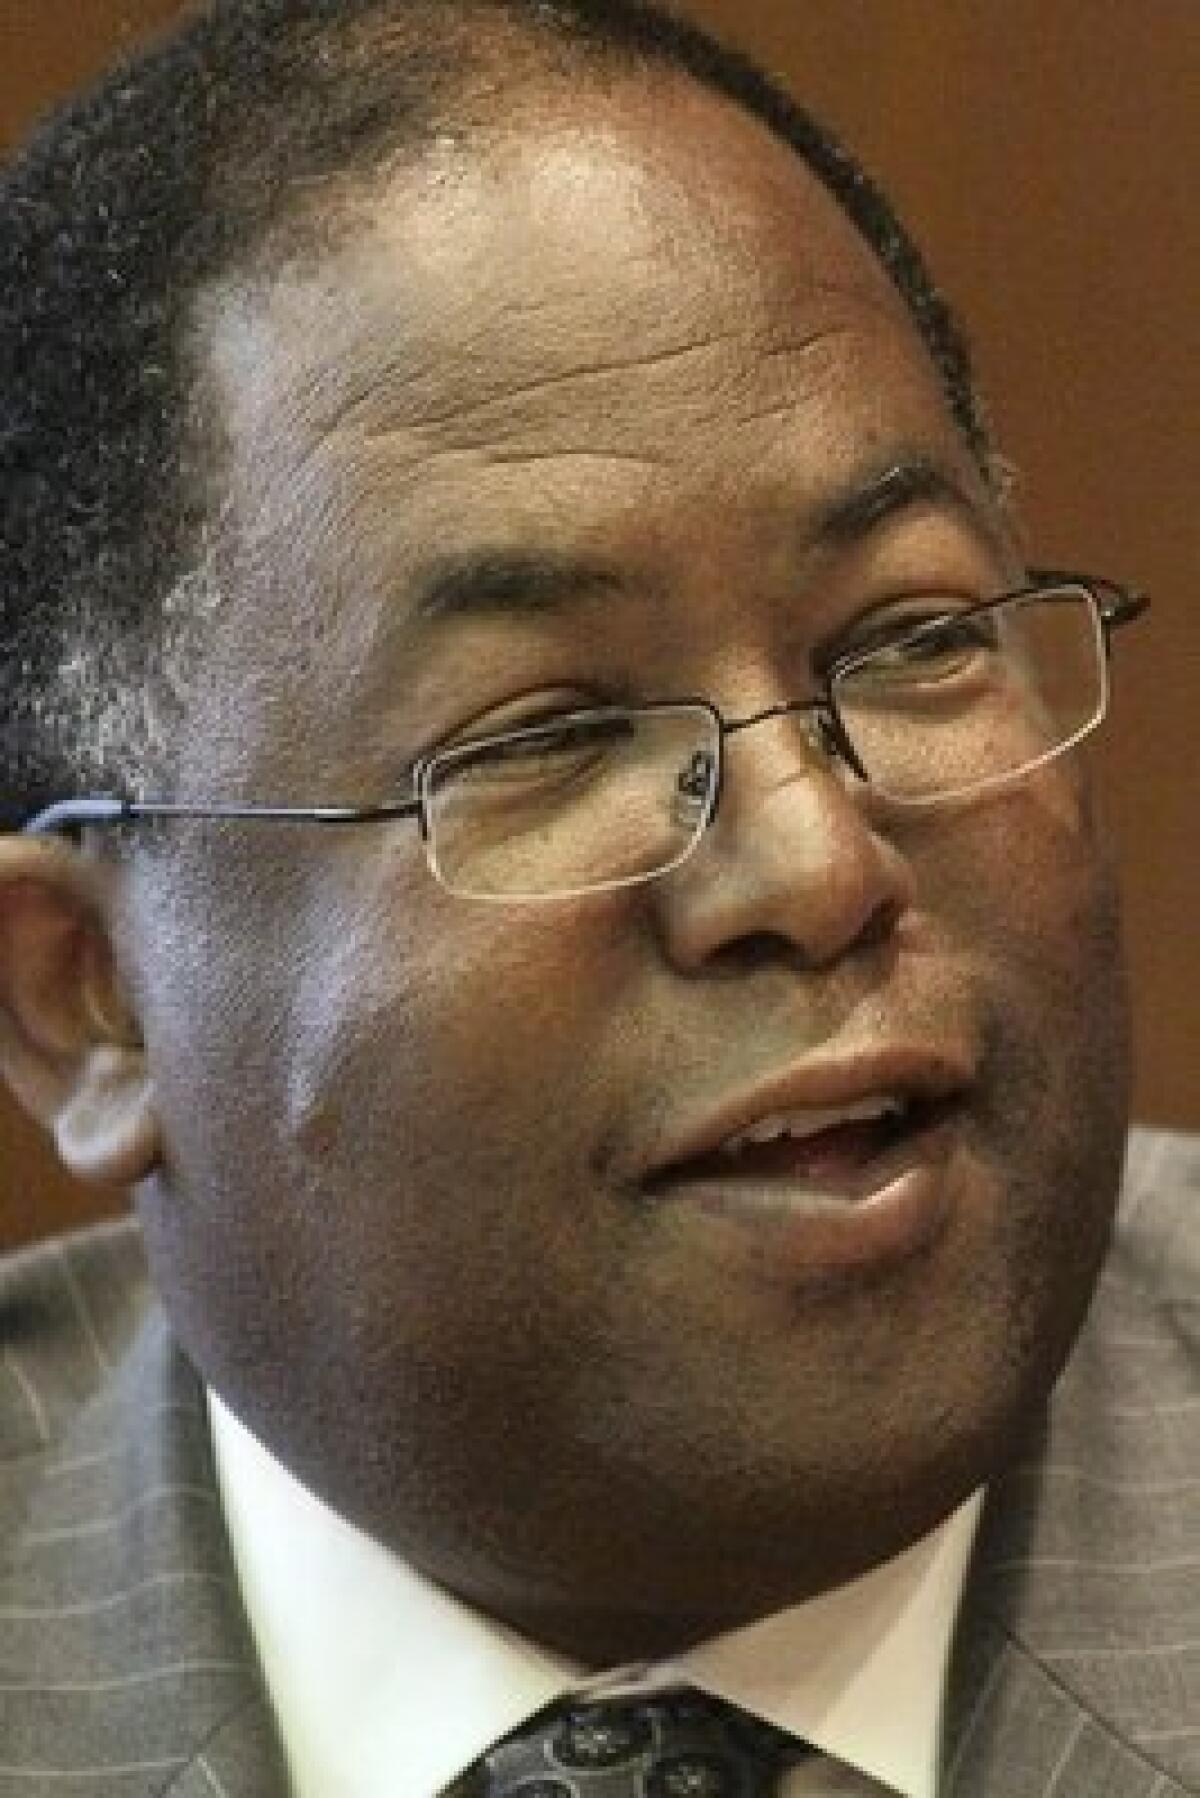 L.A. County Supervisor Mark Ridley-Thomas is shown in 2011. In an effort to protect underage girls, he and Supervisor Don Knabe will introduce a motion calling for a crackdown on johns, making solicitation of a minor a felony rather than a misdemeanor.